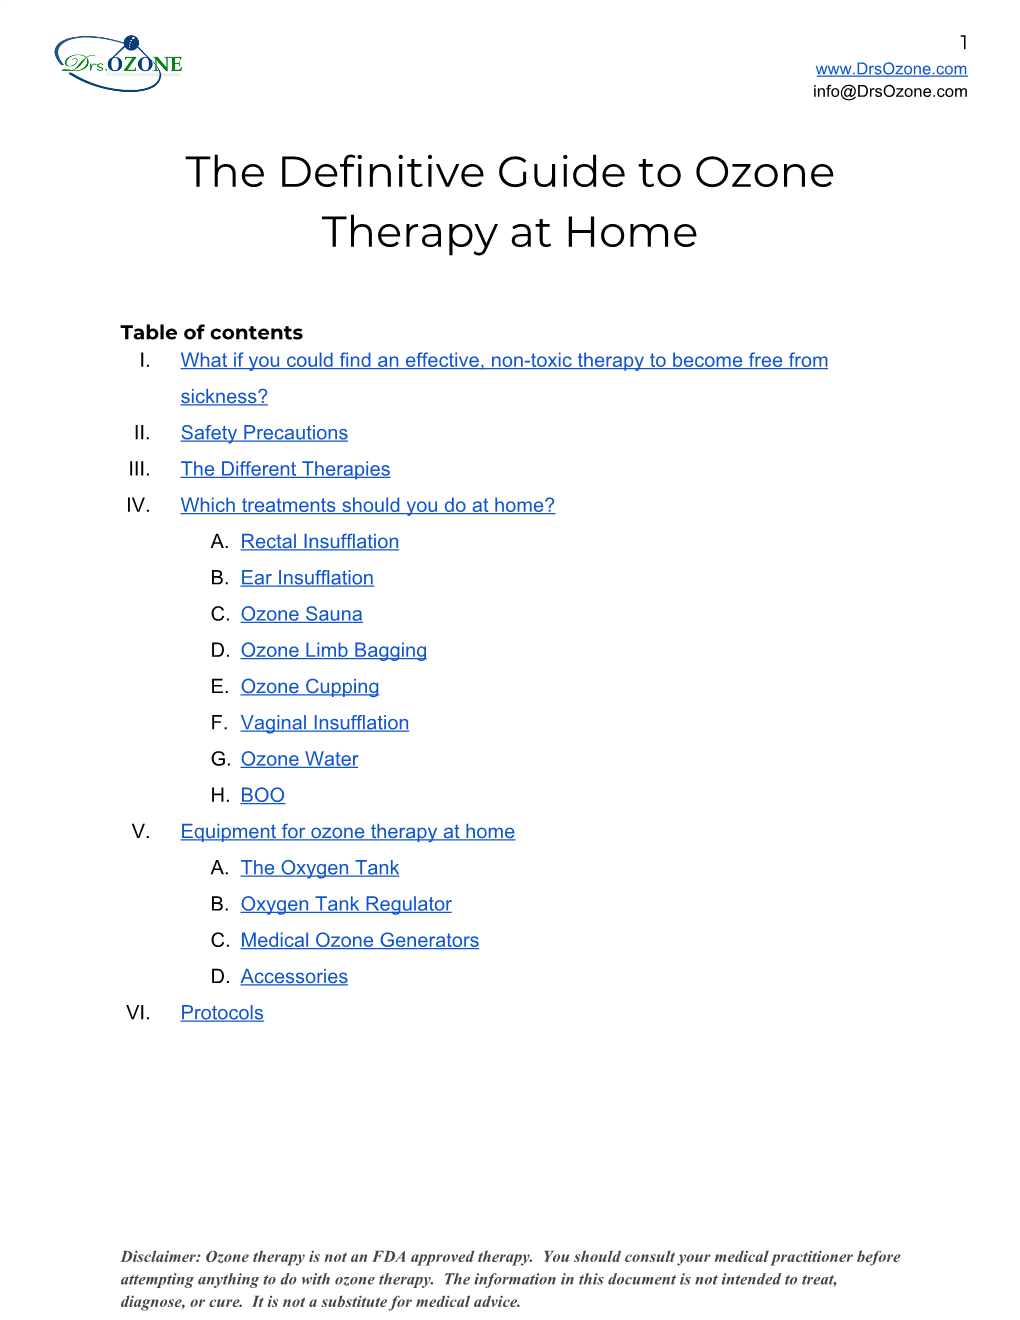 The Definitive Guide to Ozone Therapy at Home